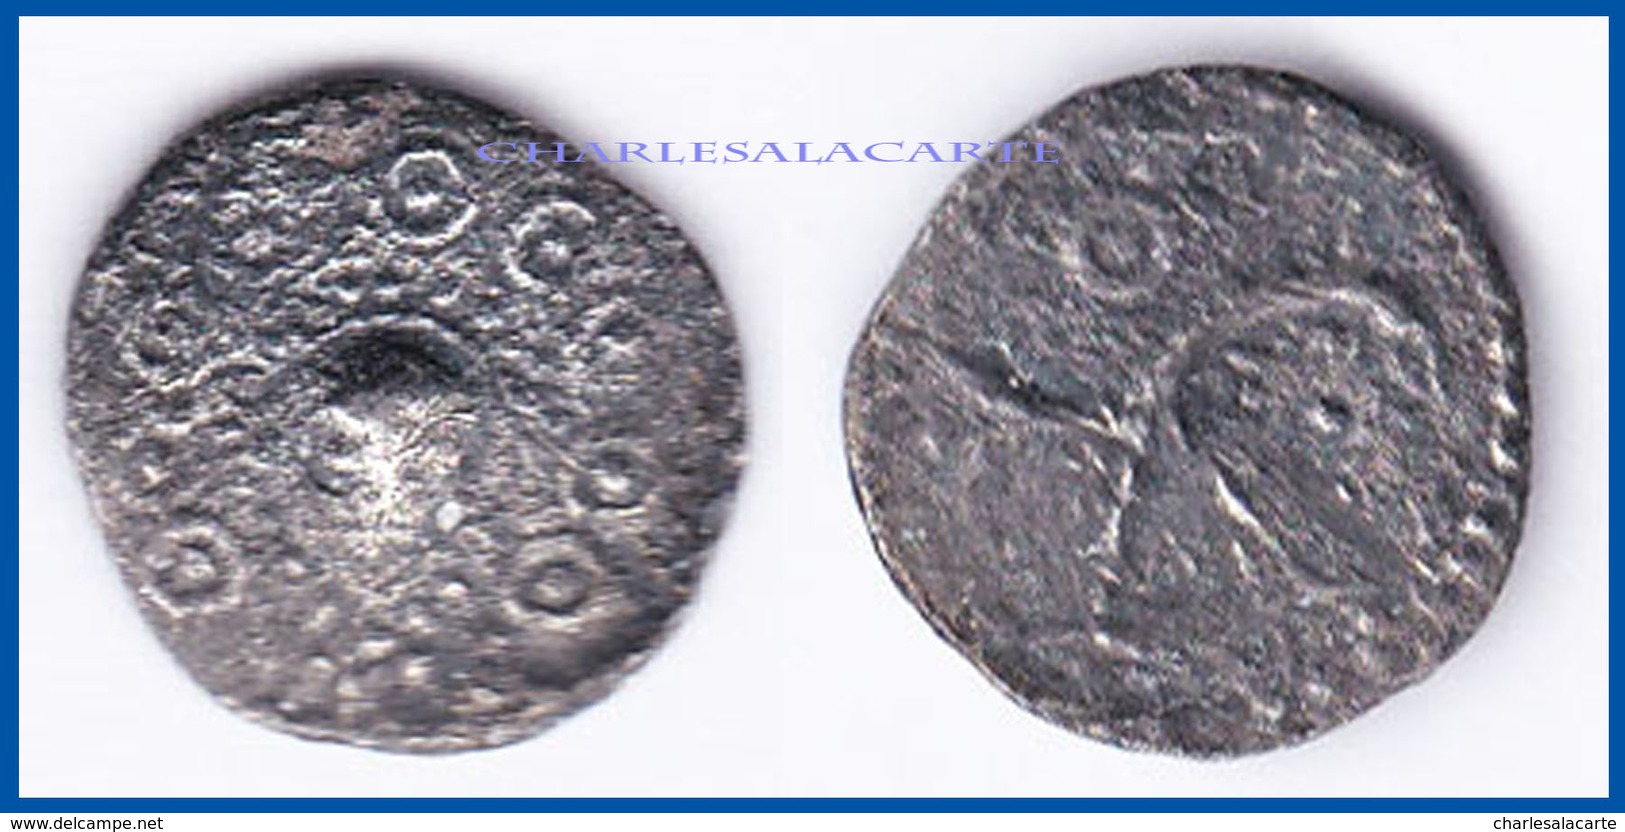 GREAT BRITAIN C.710-760 SILVER SCEAT  SERIES H  TYPE 49  FINE CONDITION - …-1066 : Celticas / Anglo-Saxonas